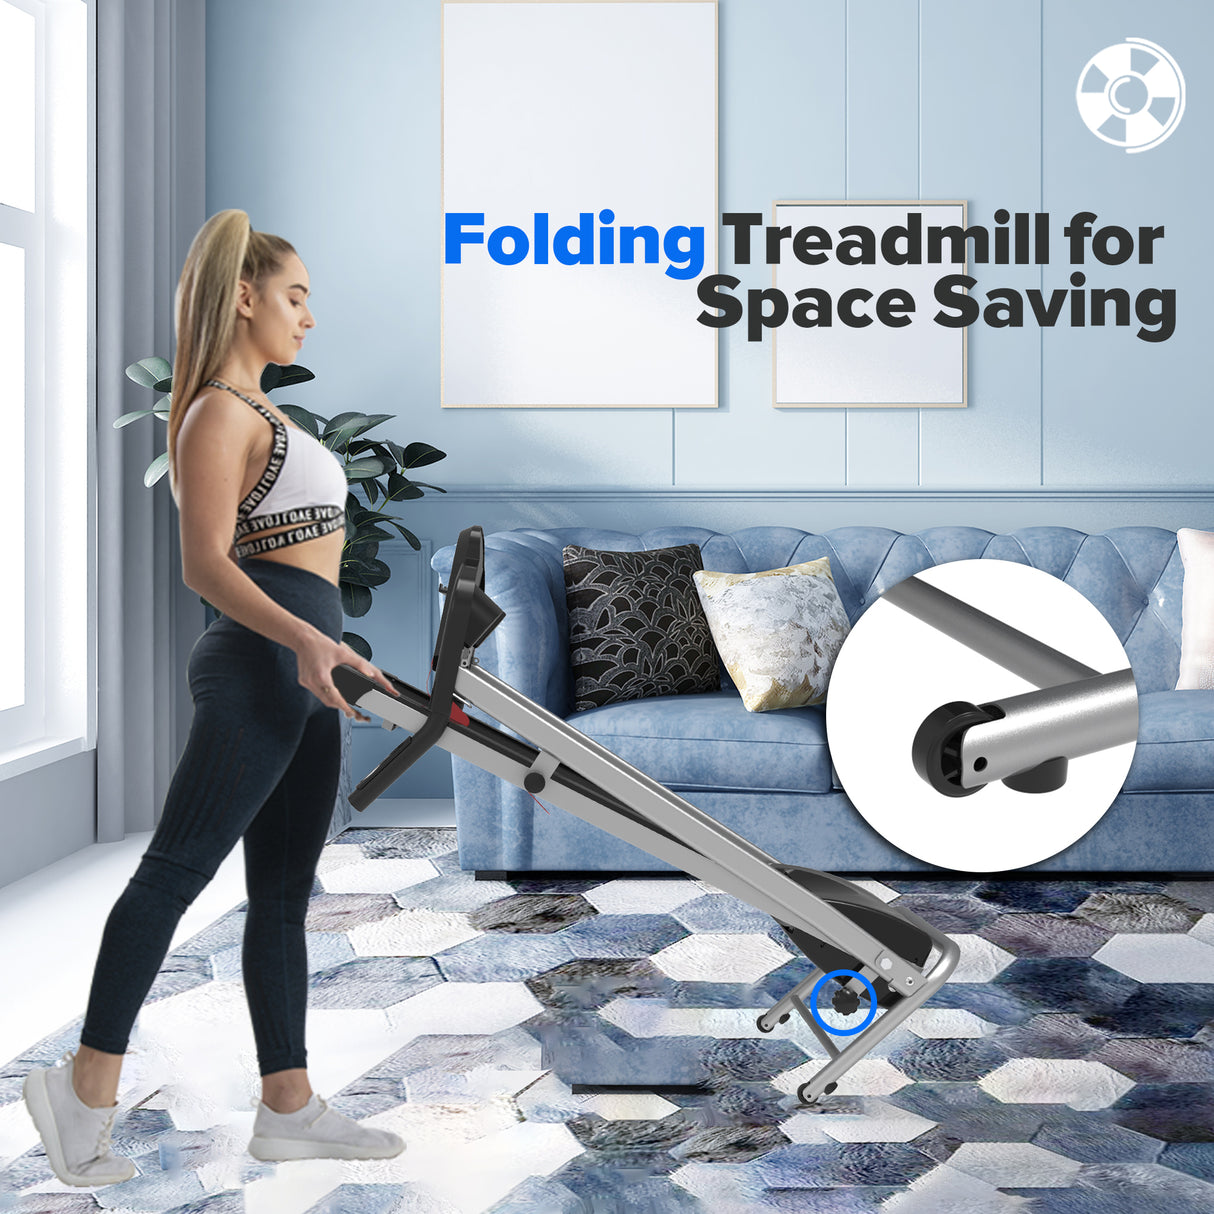 Folding Treadmill for Small Apartment, Electric Motorized Running Machine for Gym Home, Fitness Workout Jogging Walking Easily Install, Space Save